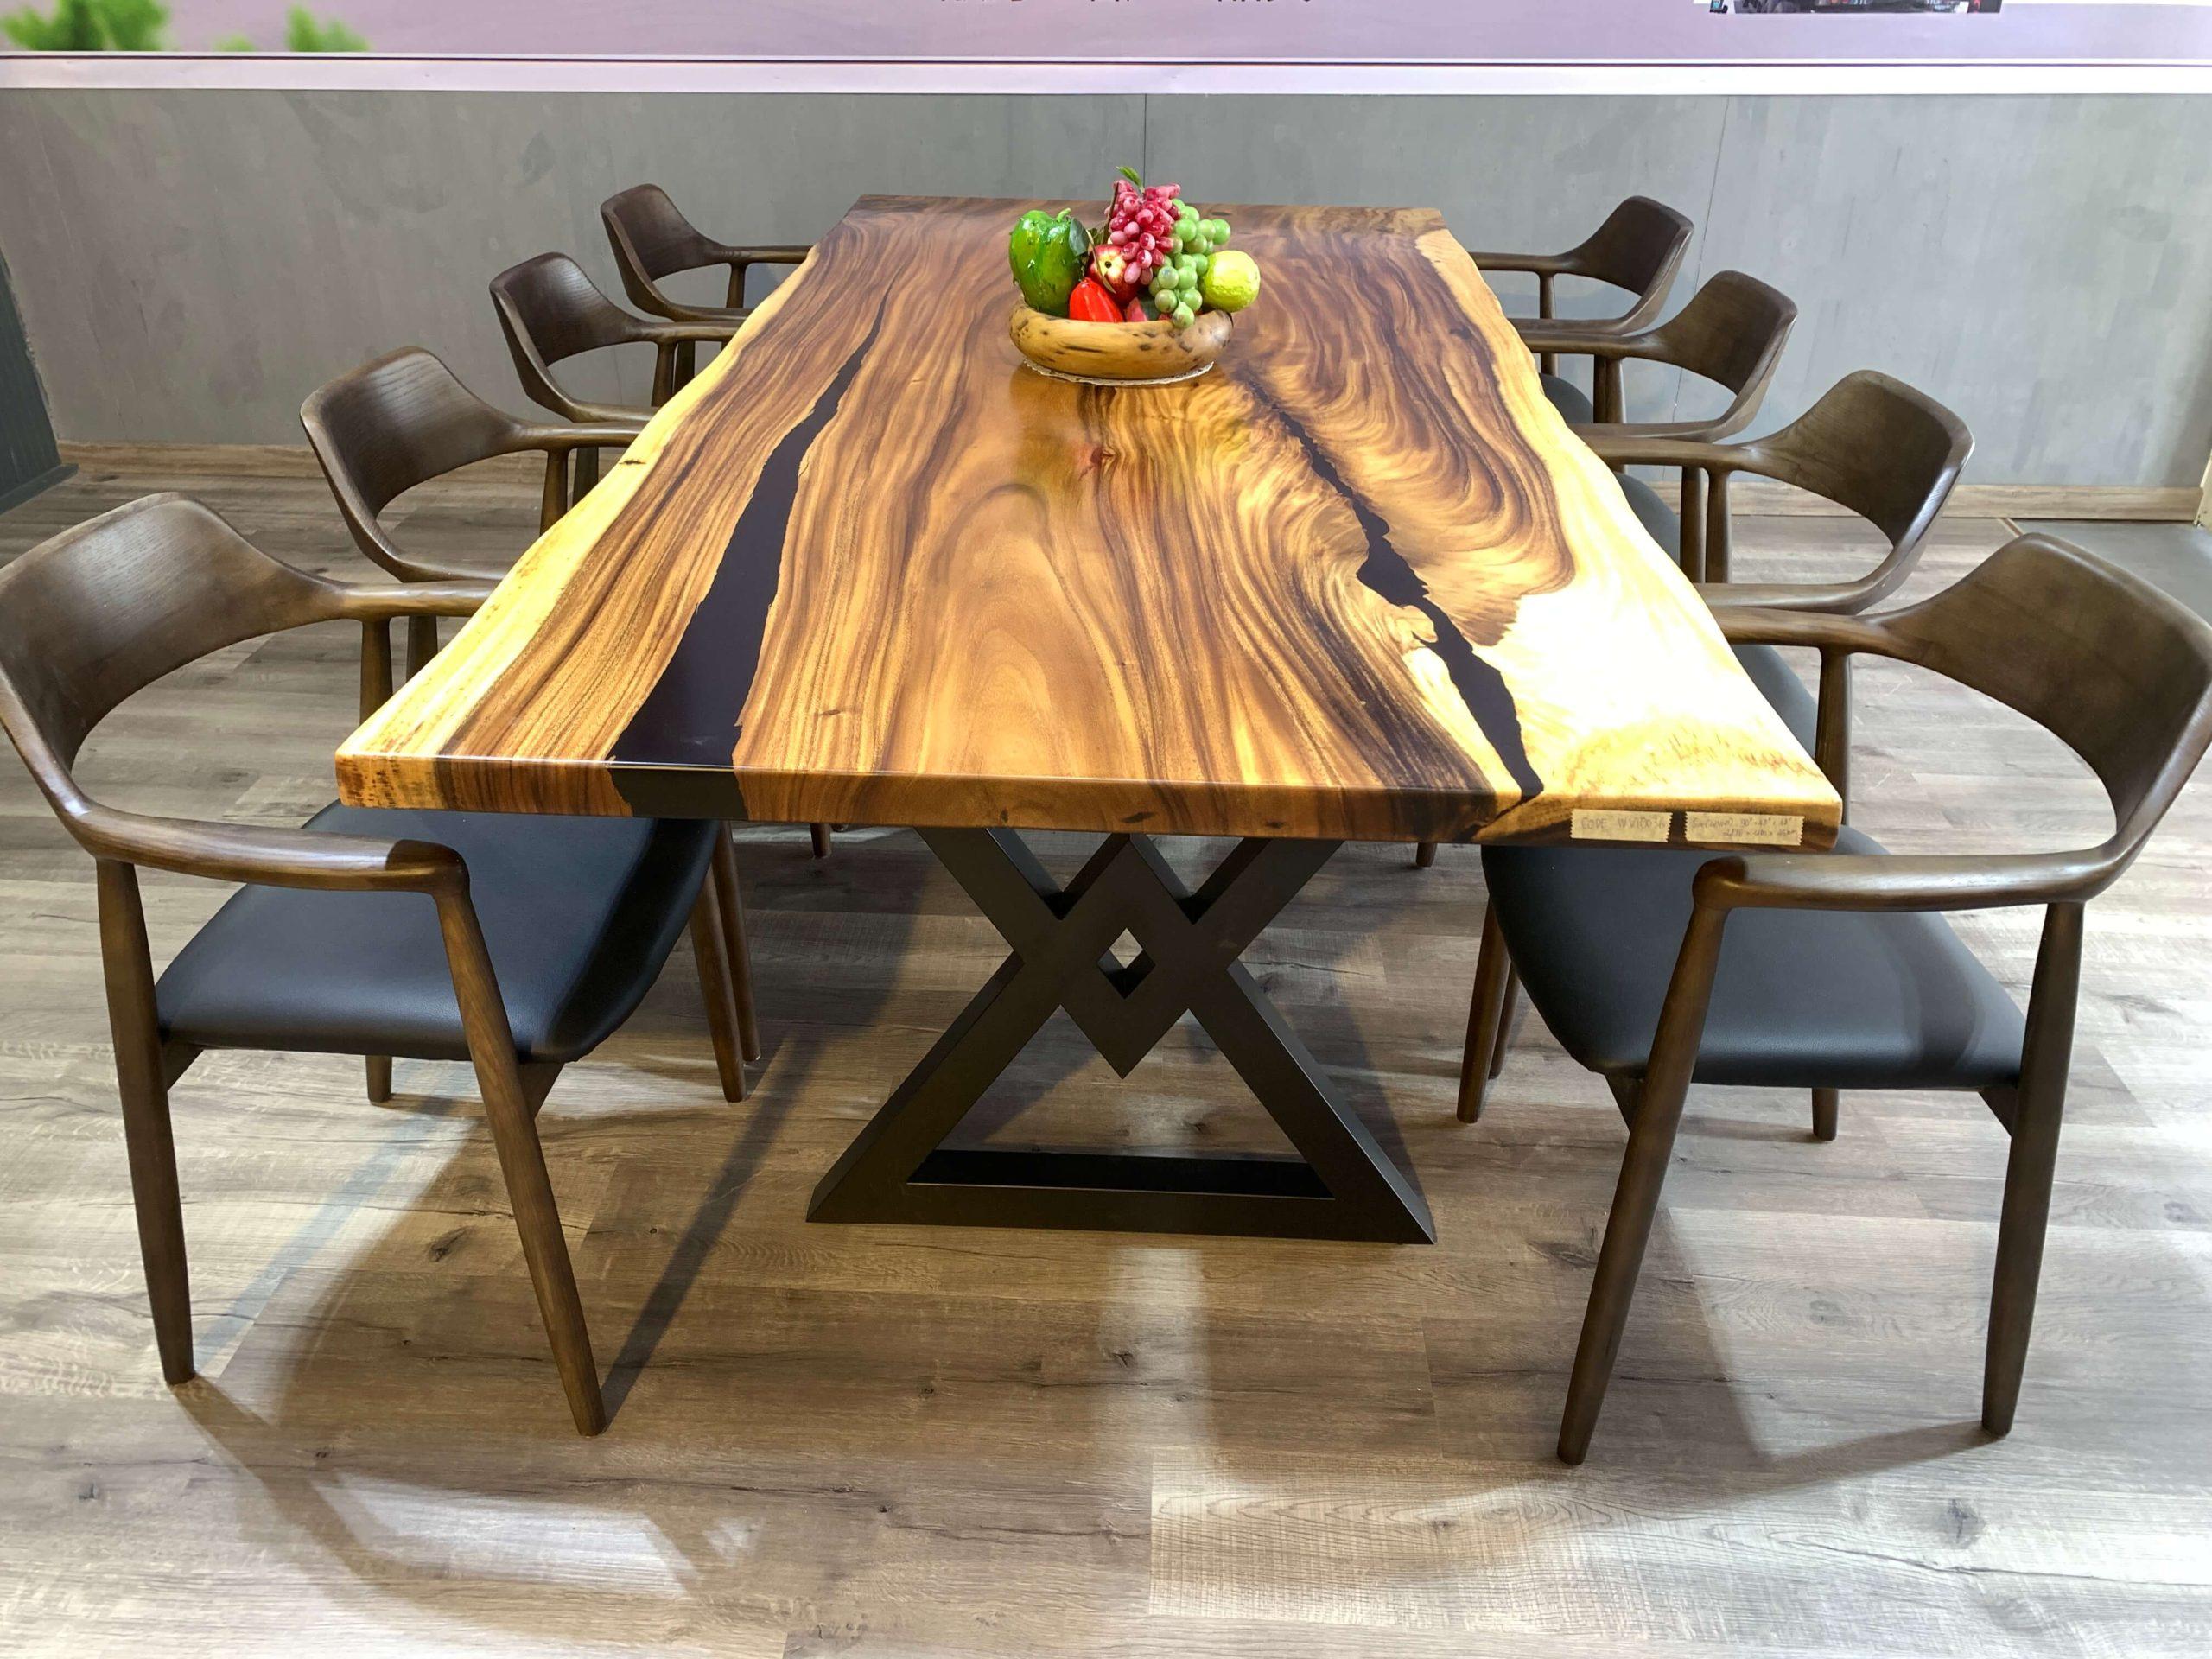 EUROPEAN FURNITURE Zambia Dining Table WVT0036-90-T Dining Table